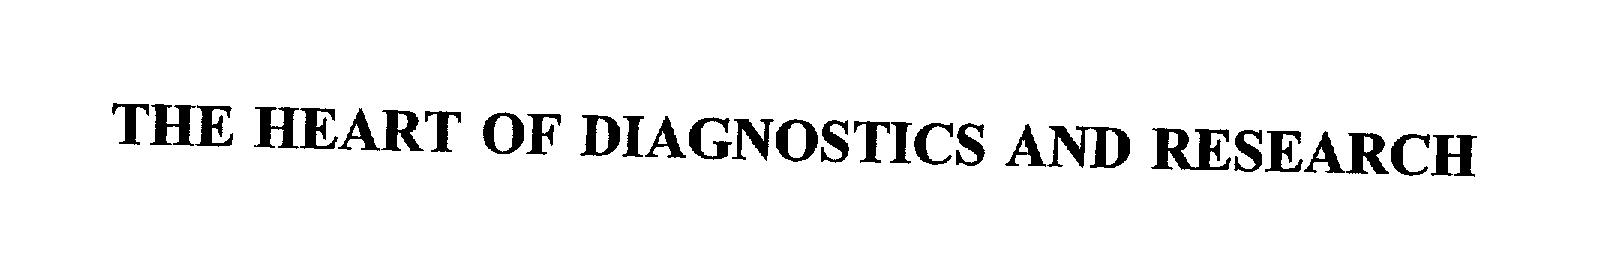 Trademark Logo THE HEART OF DIAGNOSTICS AND RESEARCH